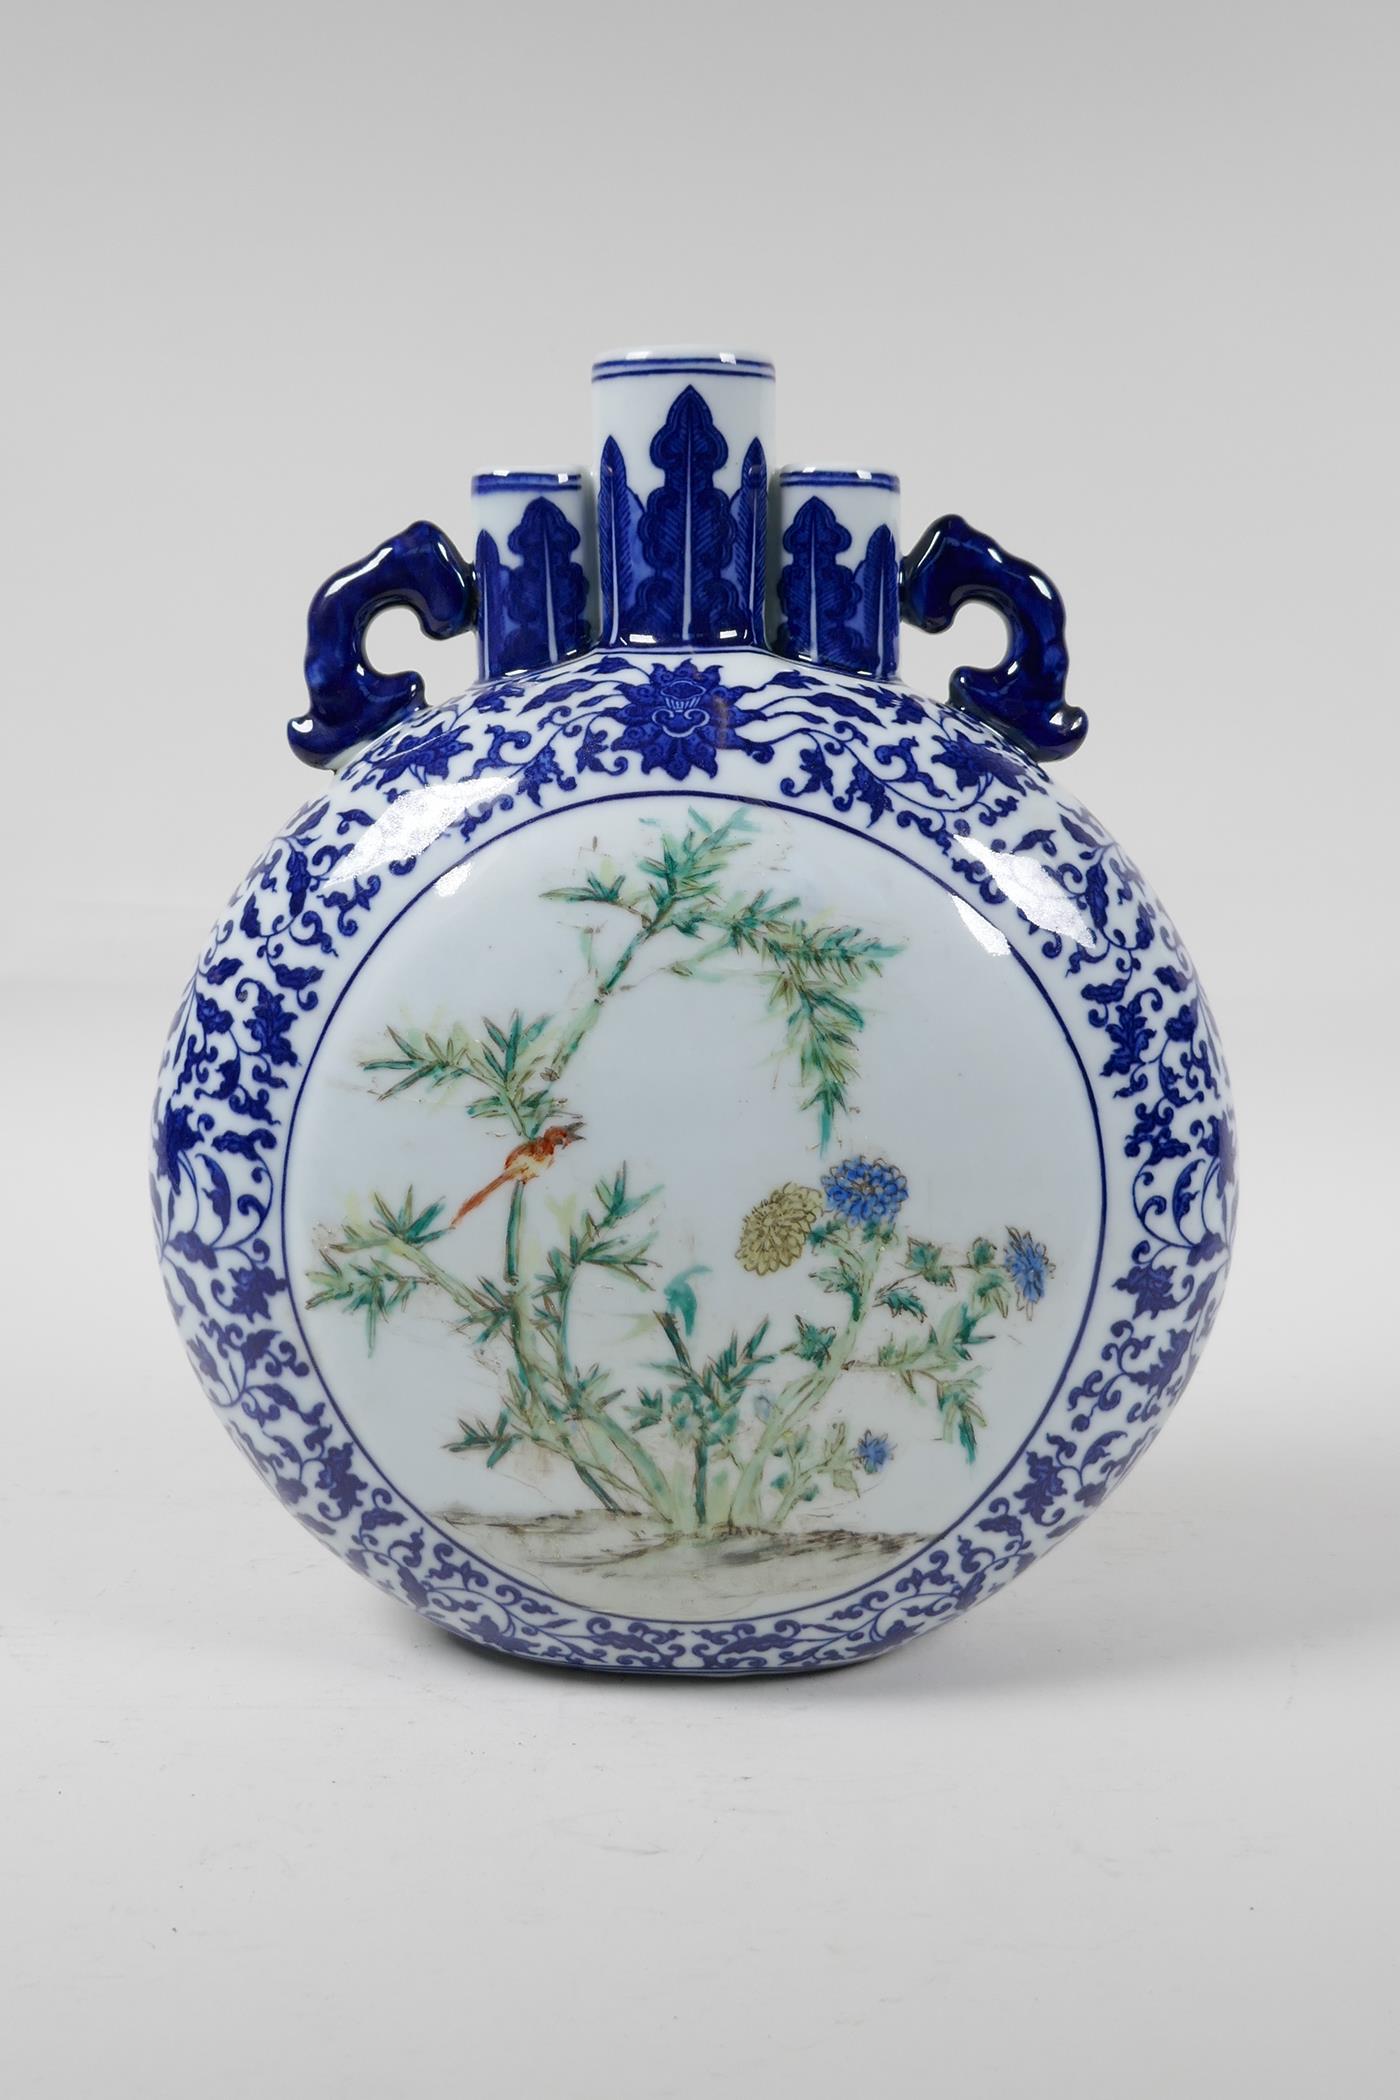 A Chinese blue and white porcelain triple stem moon flask with polychrome panels depicting a - Image 5 of 7